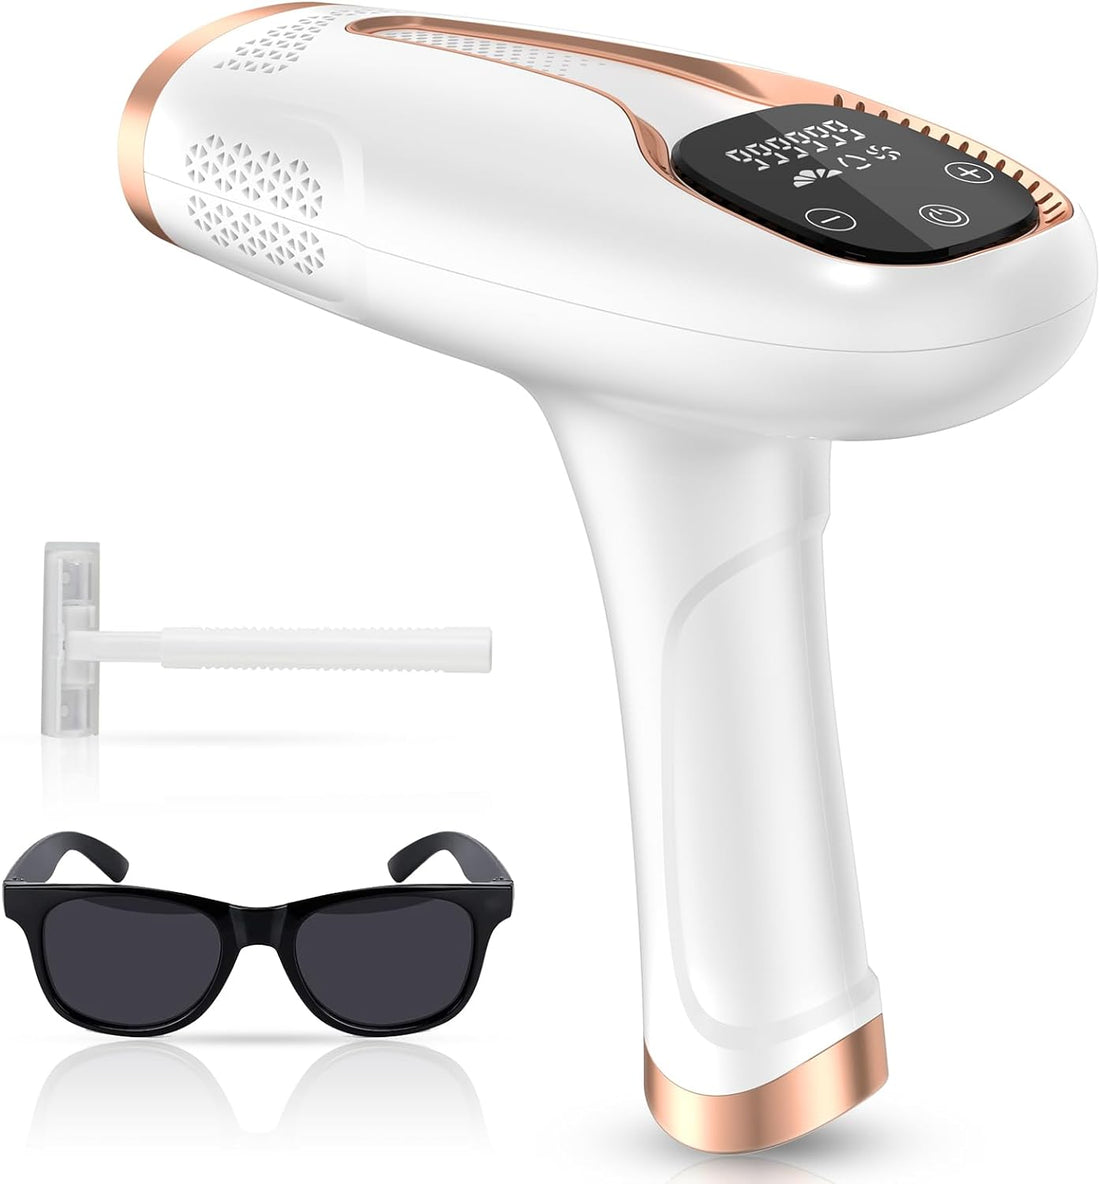 Laser Hair Removal for Women and Men, IPL Hair Removal 999,999 Flashes Permanent Hair Removal Device for Facial Facial Legs Arms Bikini Line Whole Body Use At-Home